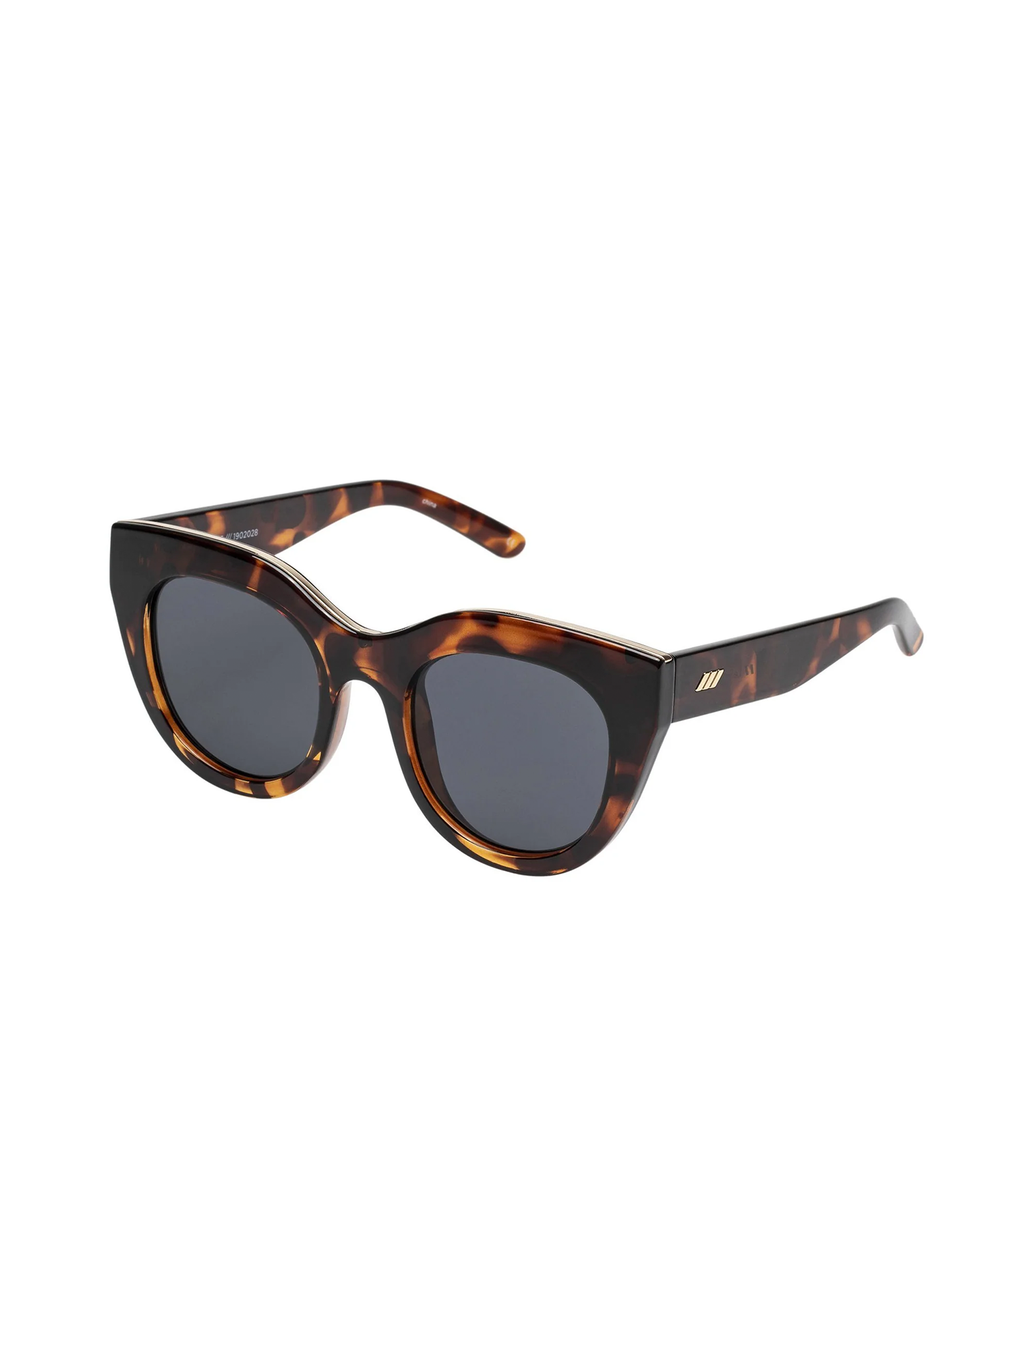 Air Heart Sunnies in Tort - Stitch And Feather